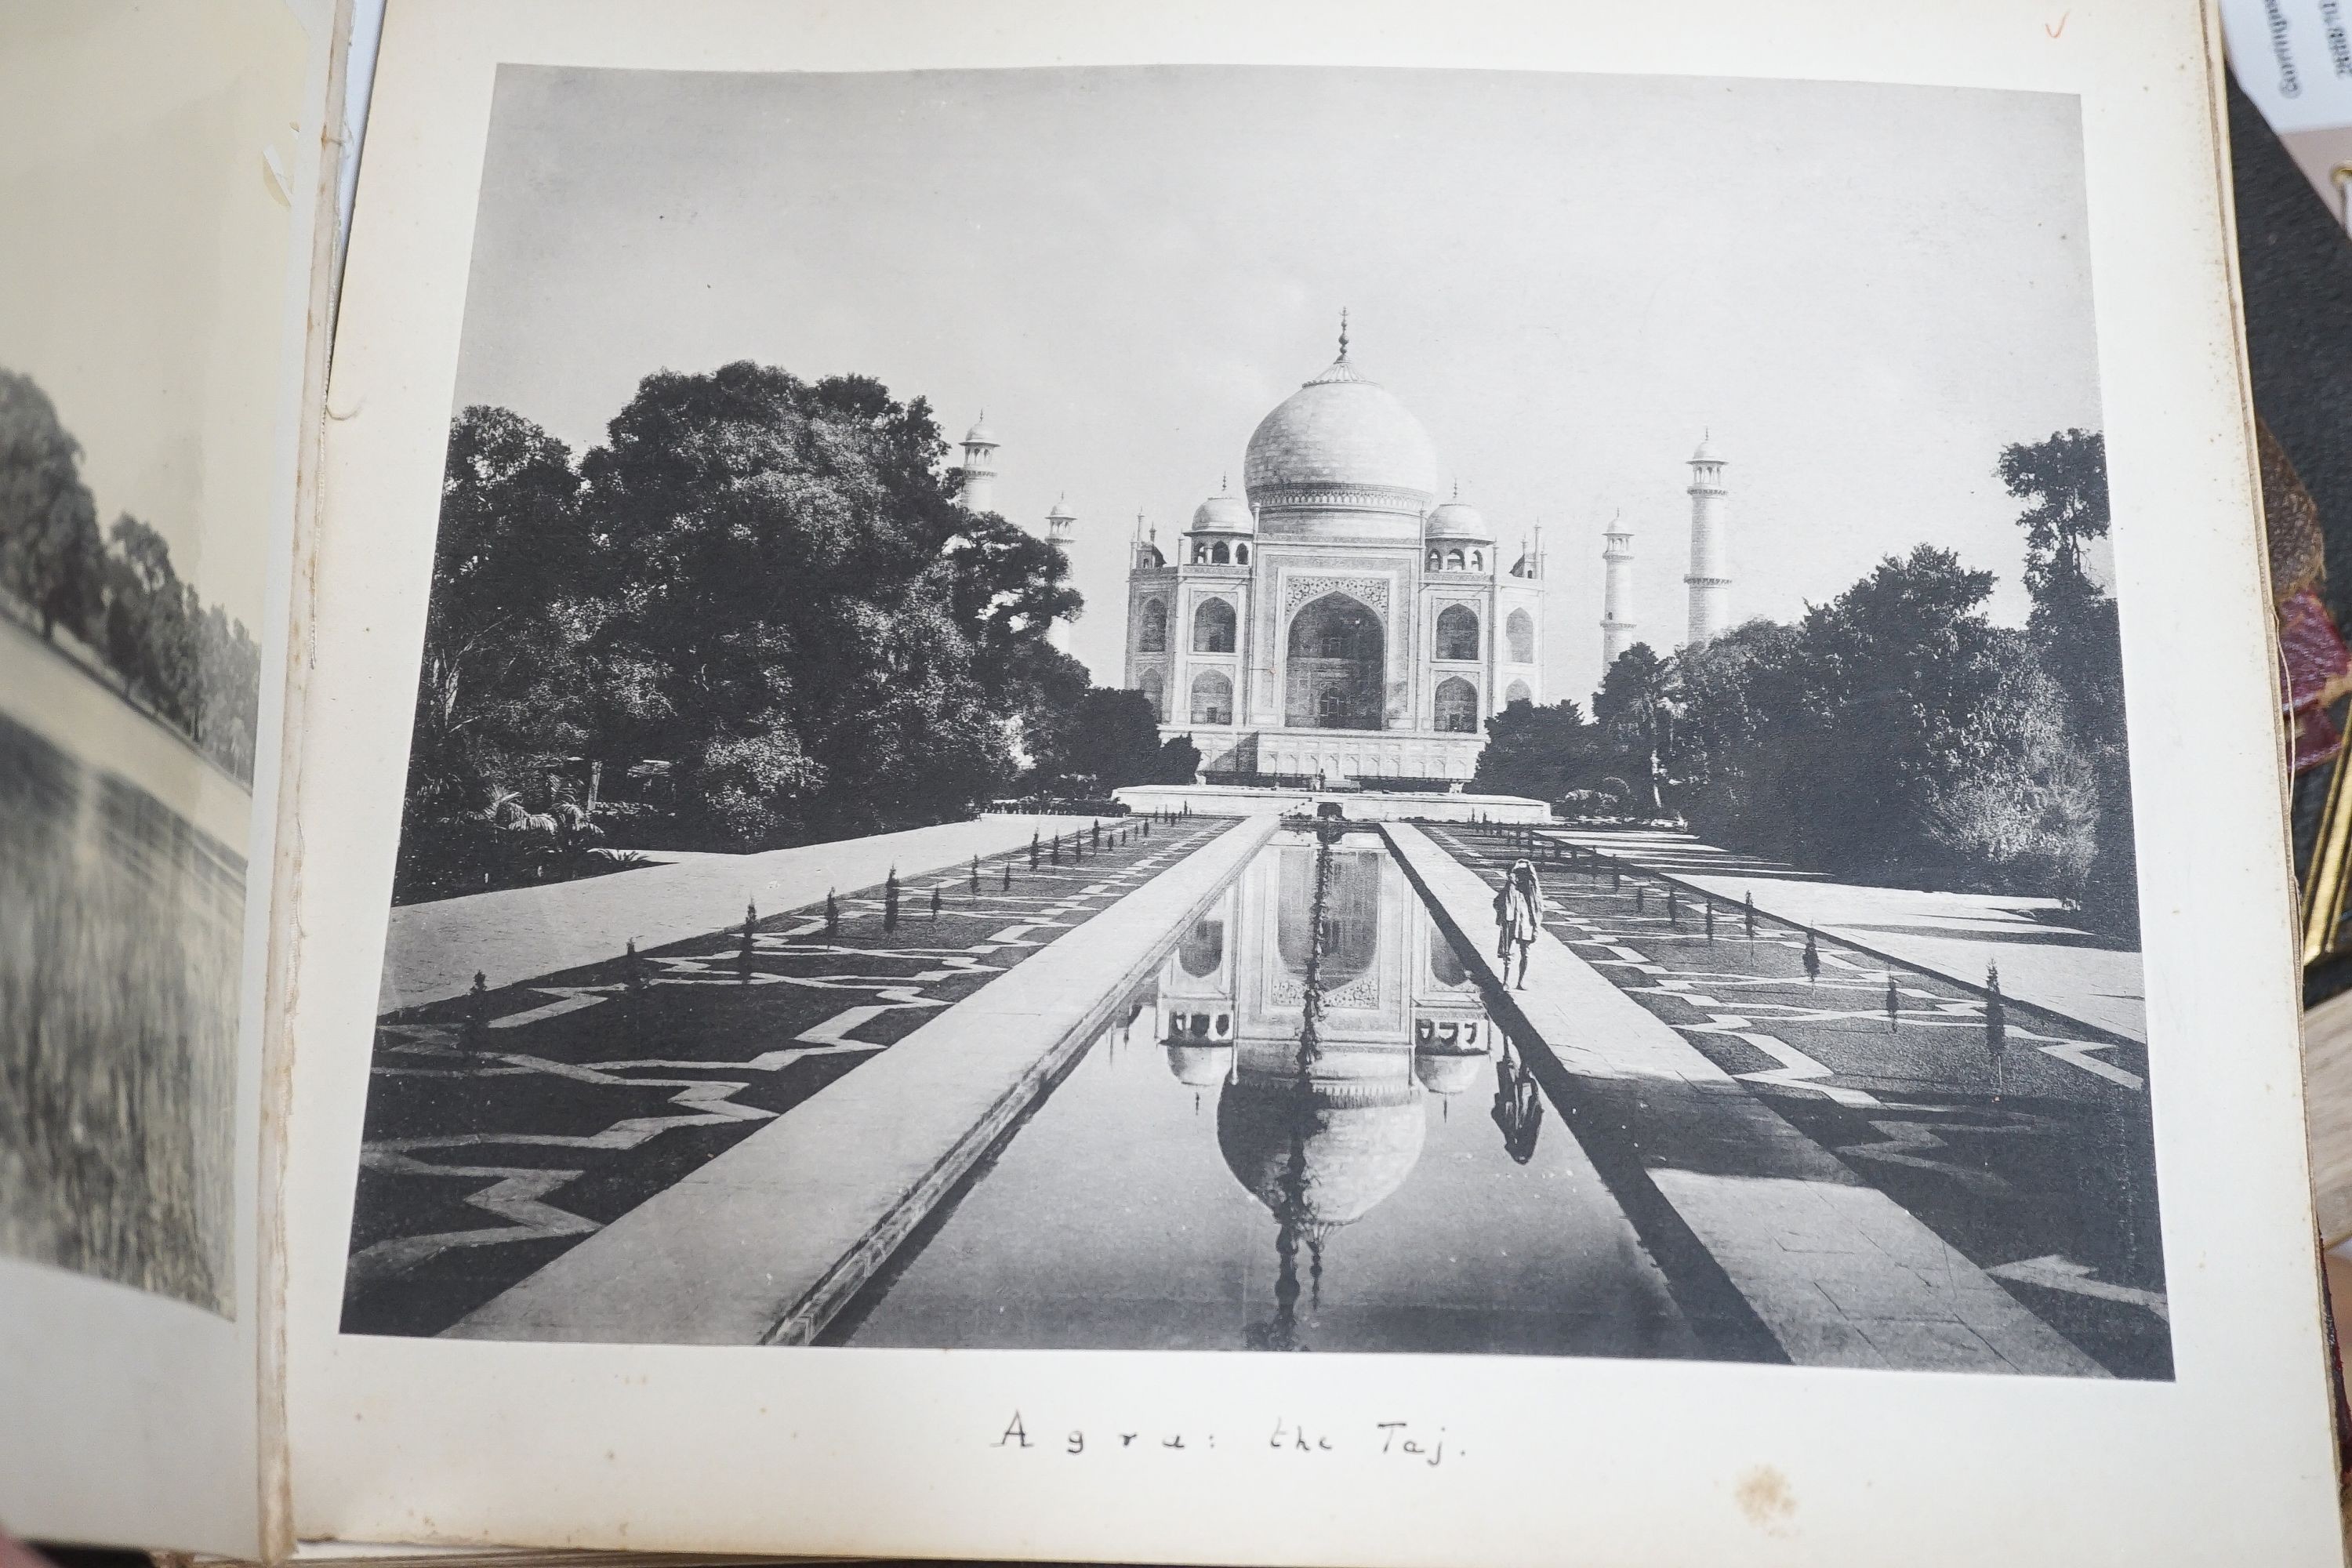 Six albums of late 19th/early 20th century photographs, mainly topographical views, one album India-related